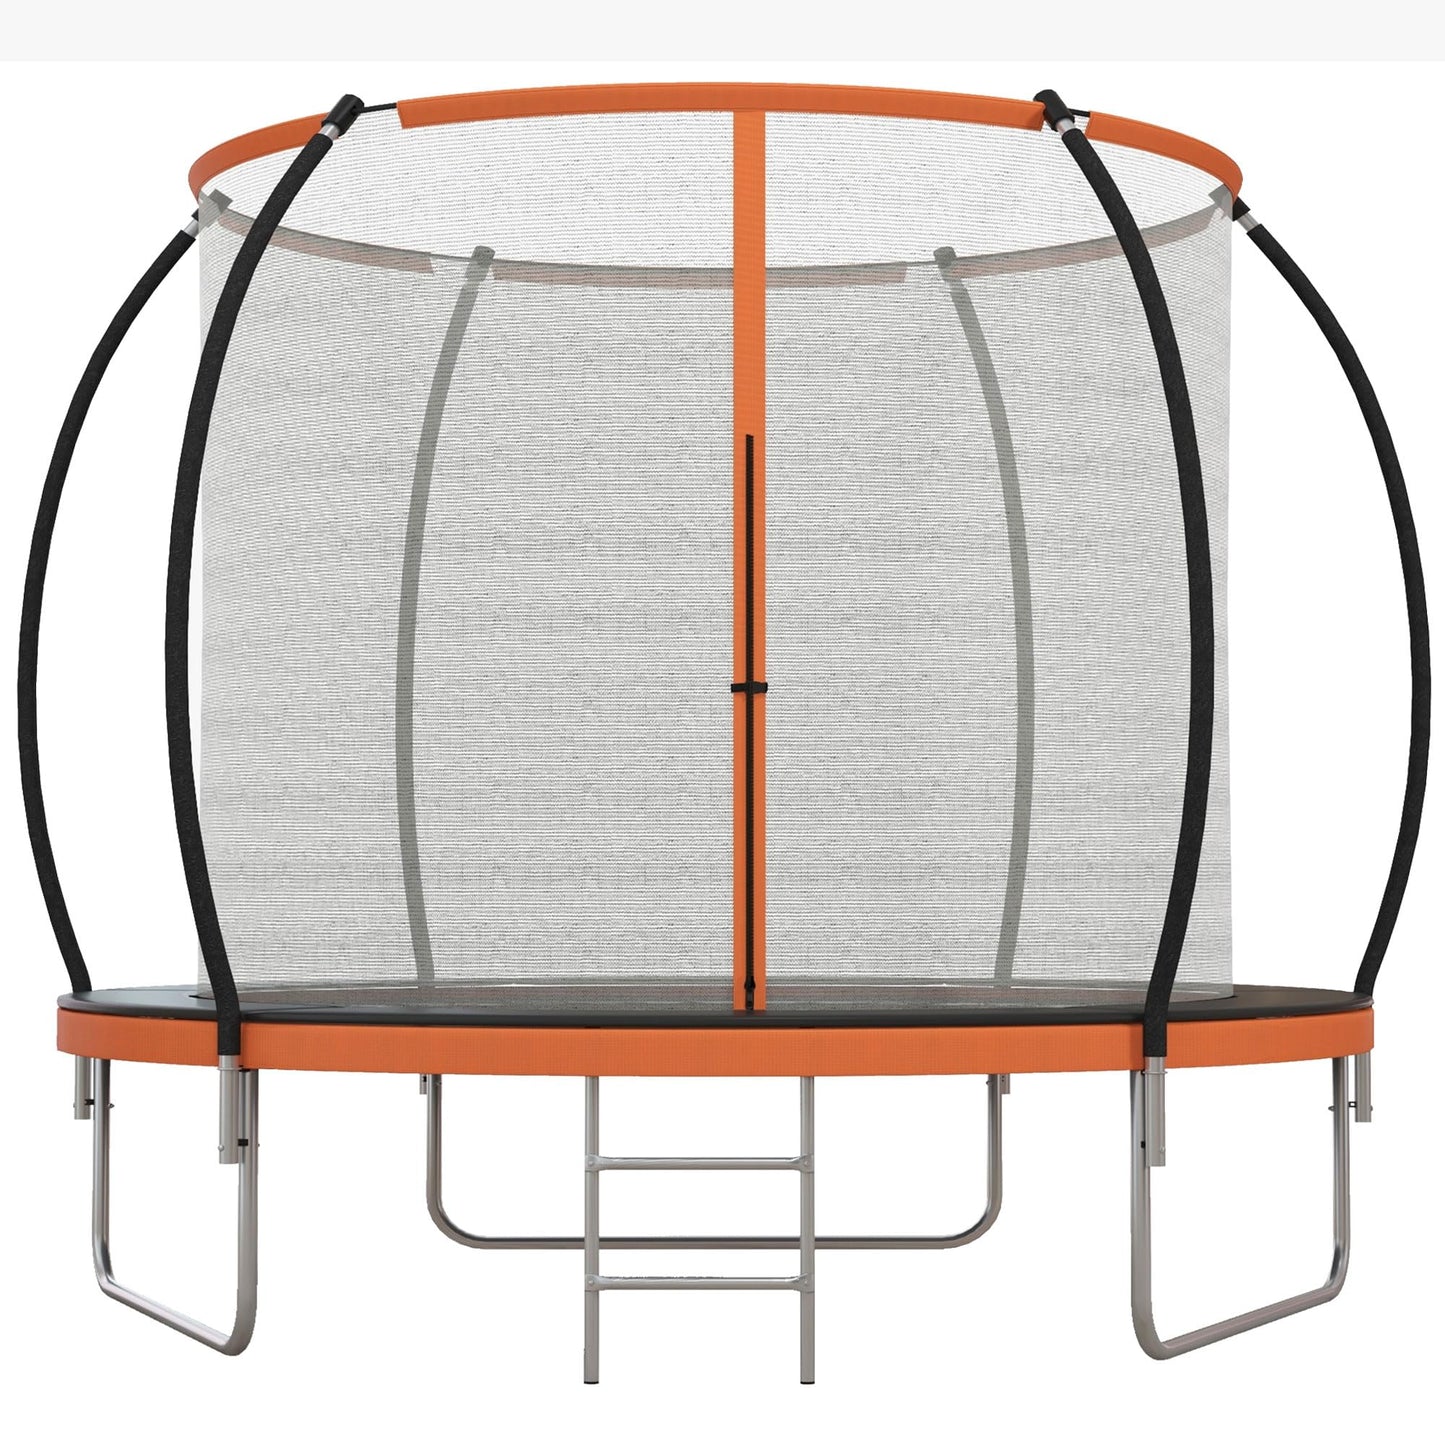 8ft Trampoline with Enclosure Net and Ladder. Phil and Gazelle.